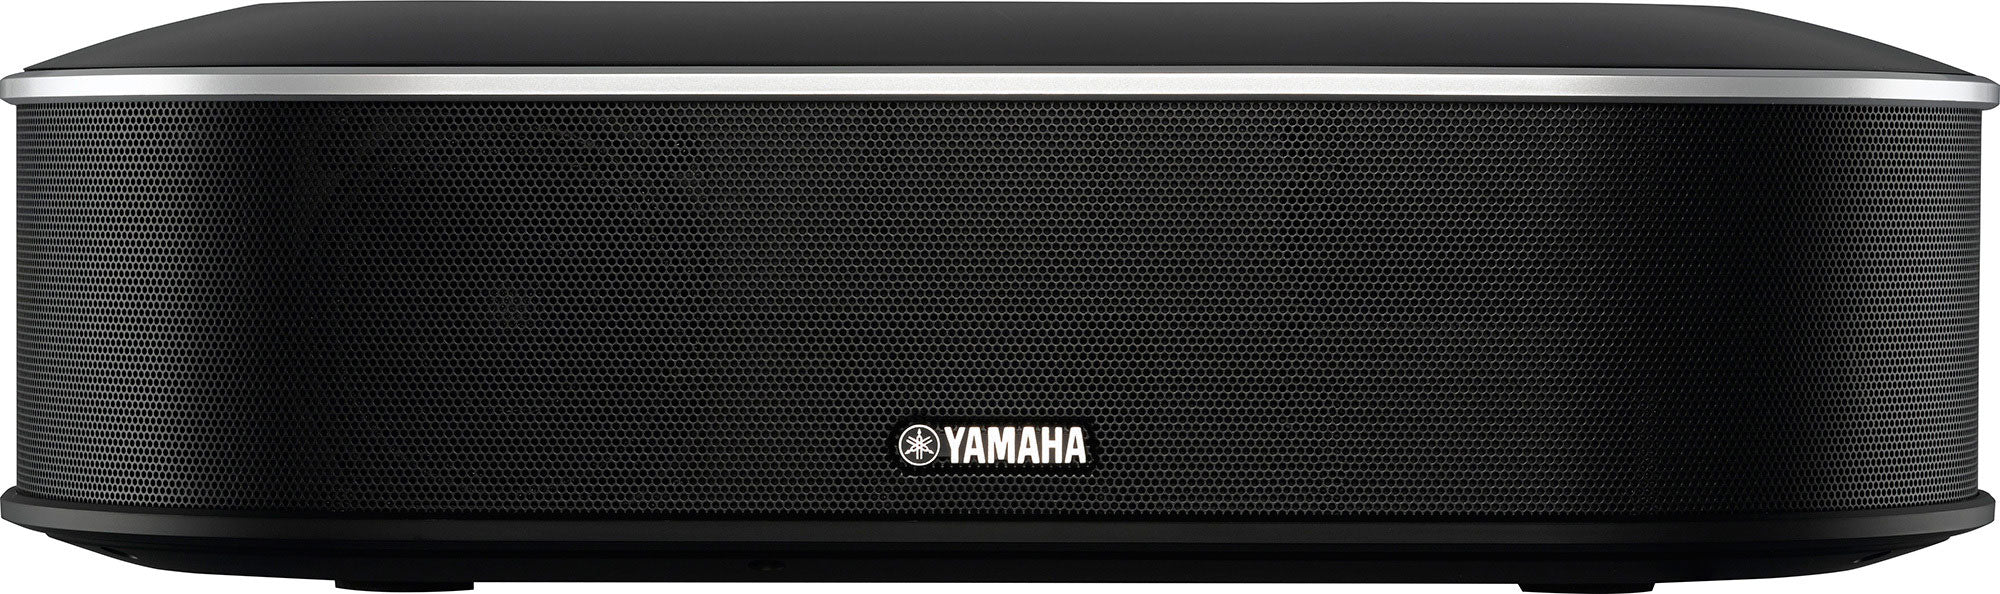 YAMAHA YVC-1000 Unified Communications Microphone and Speaker